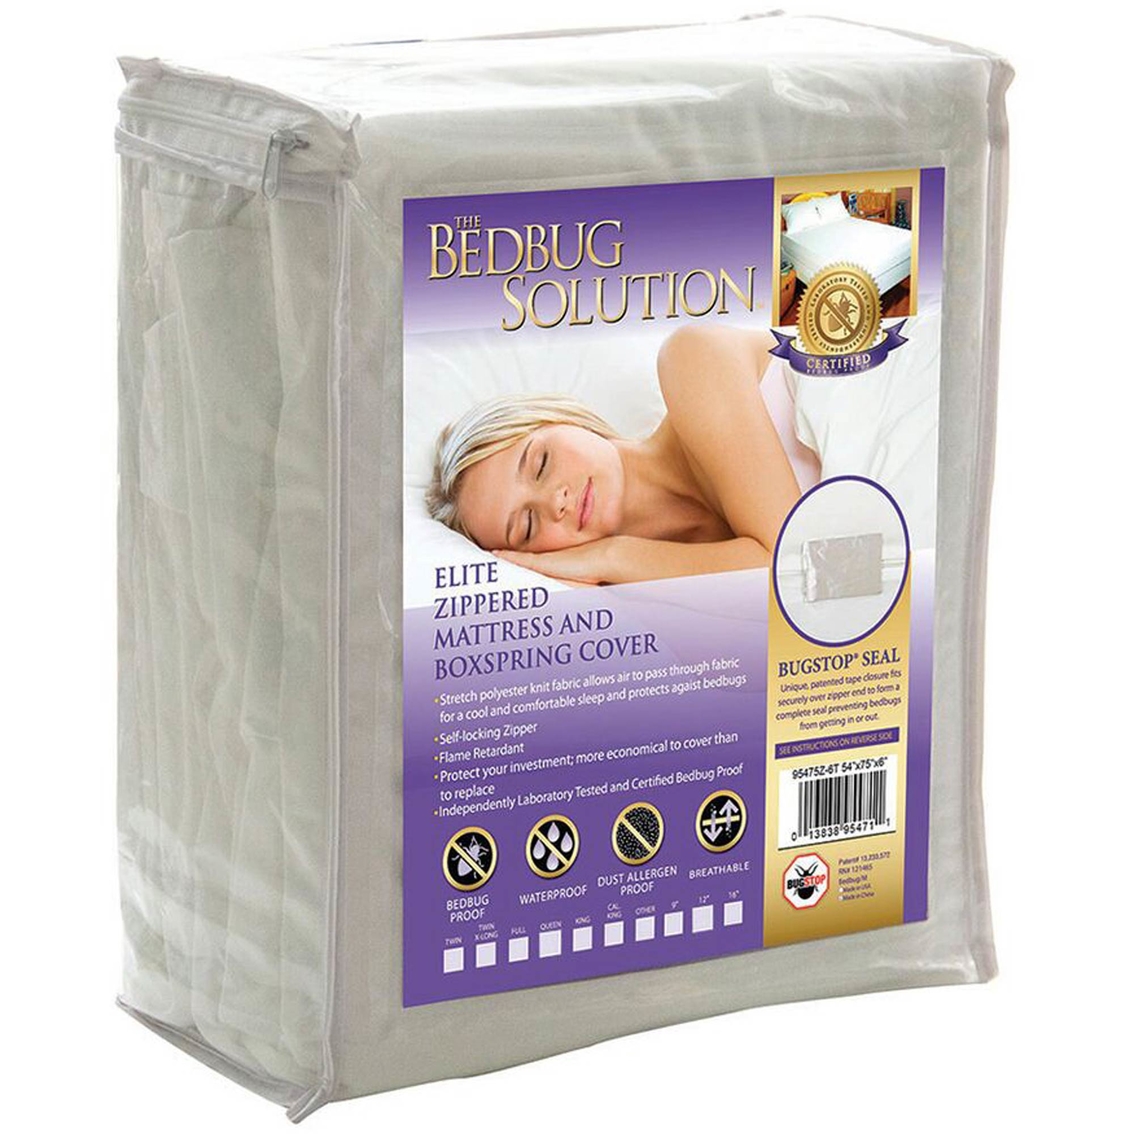 The BedBug Solution Elite 9 in. Mattress Cover - Image 3 of 3